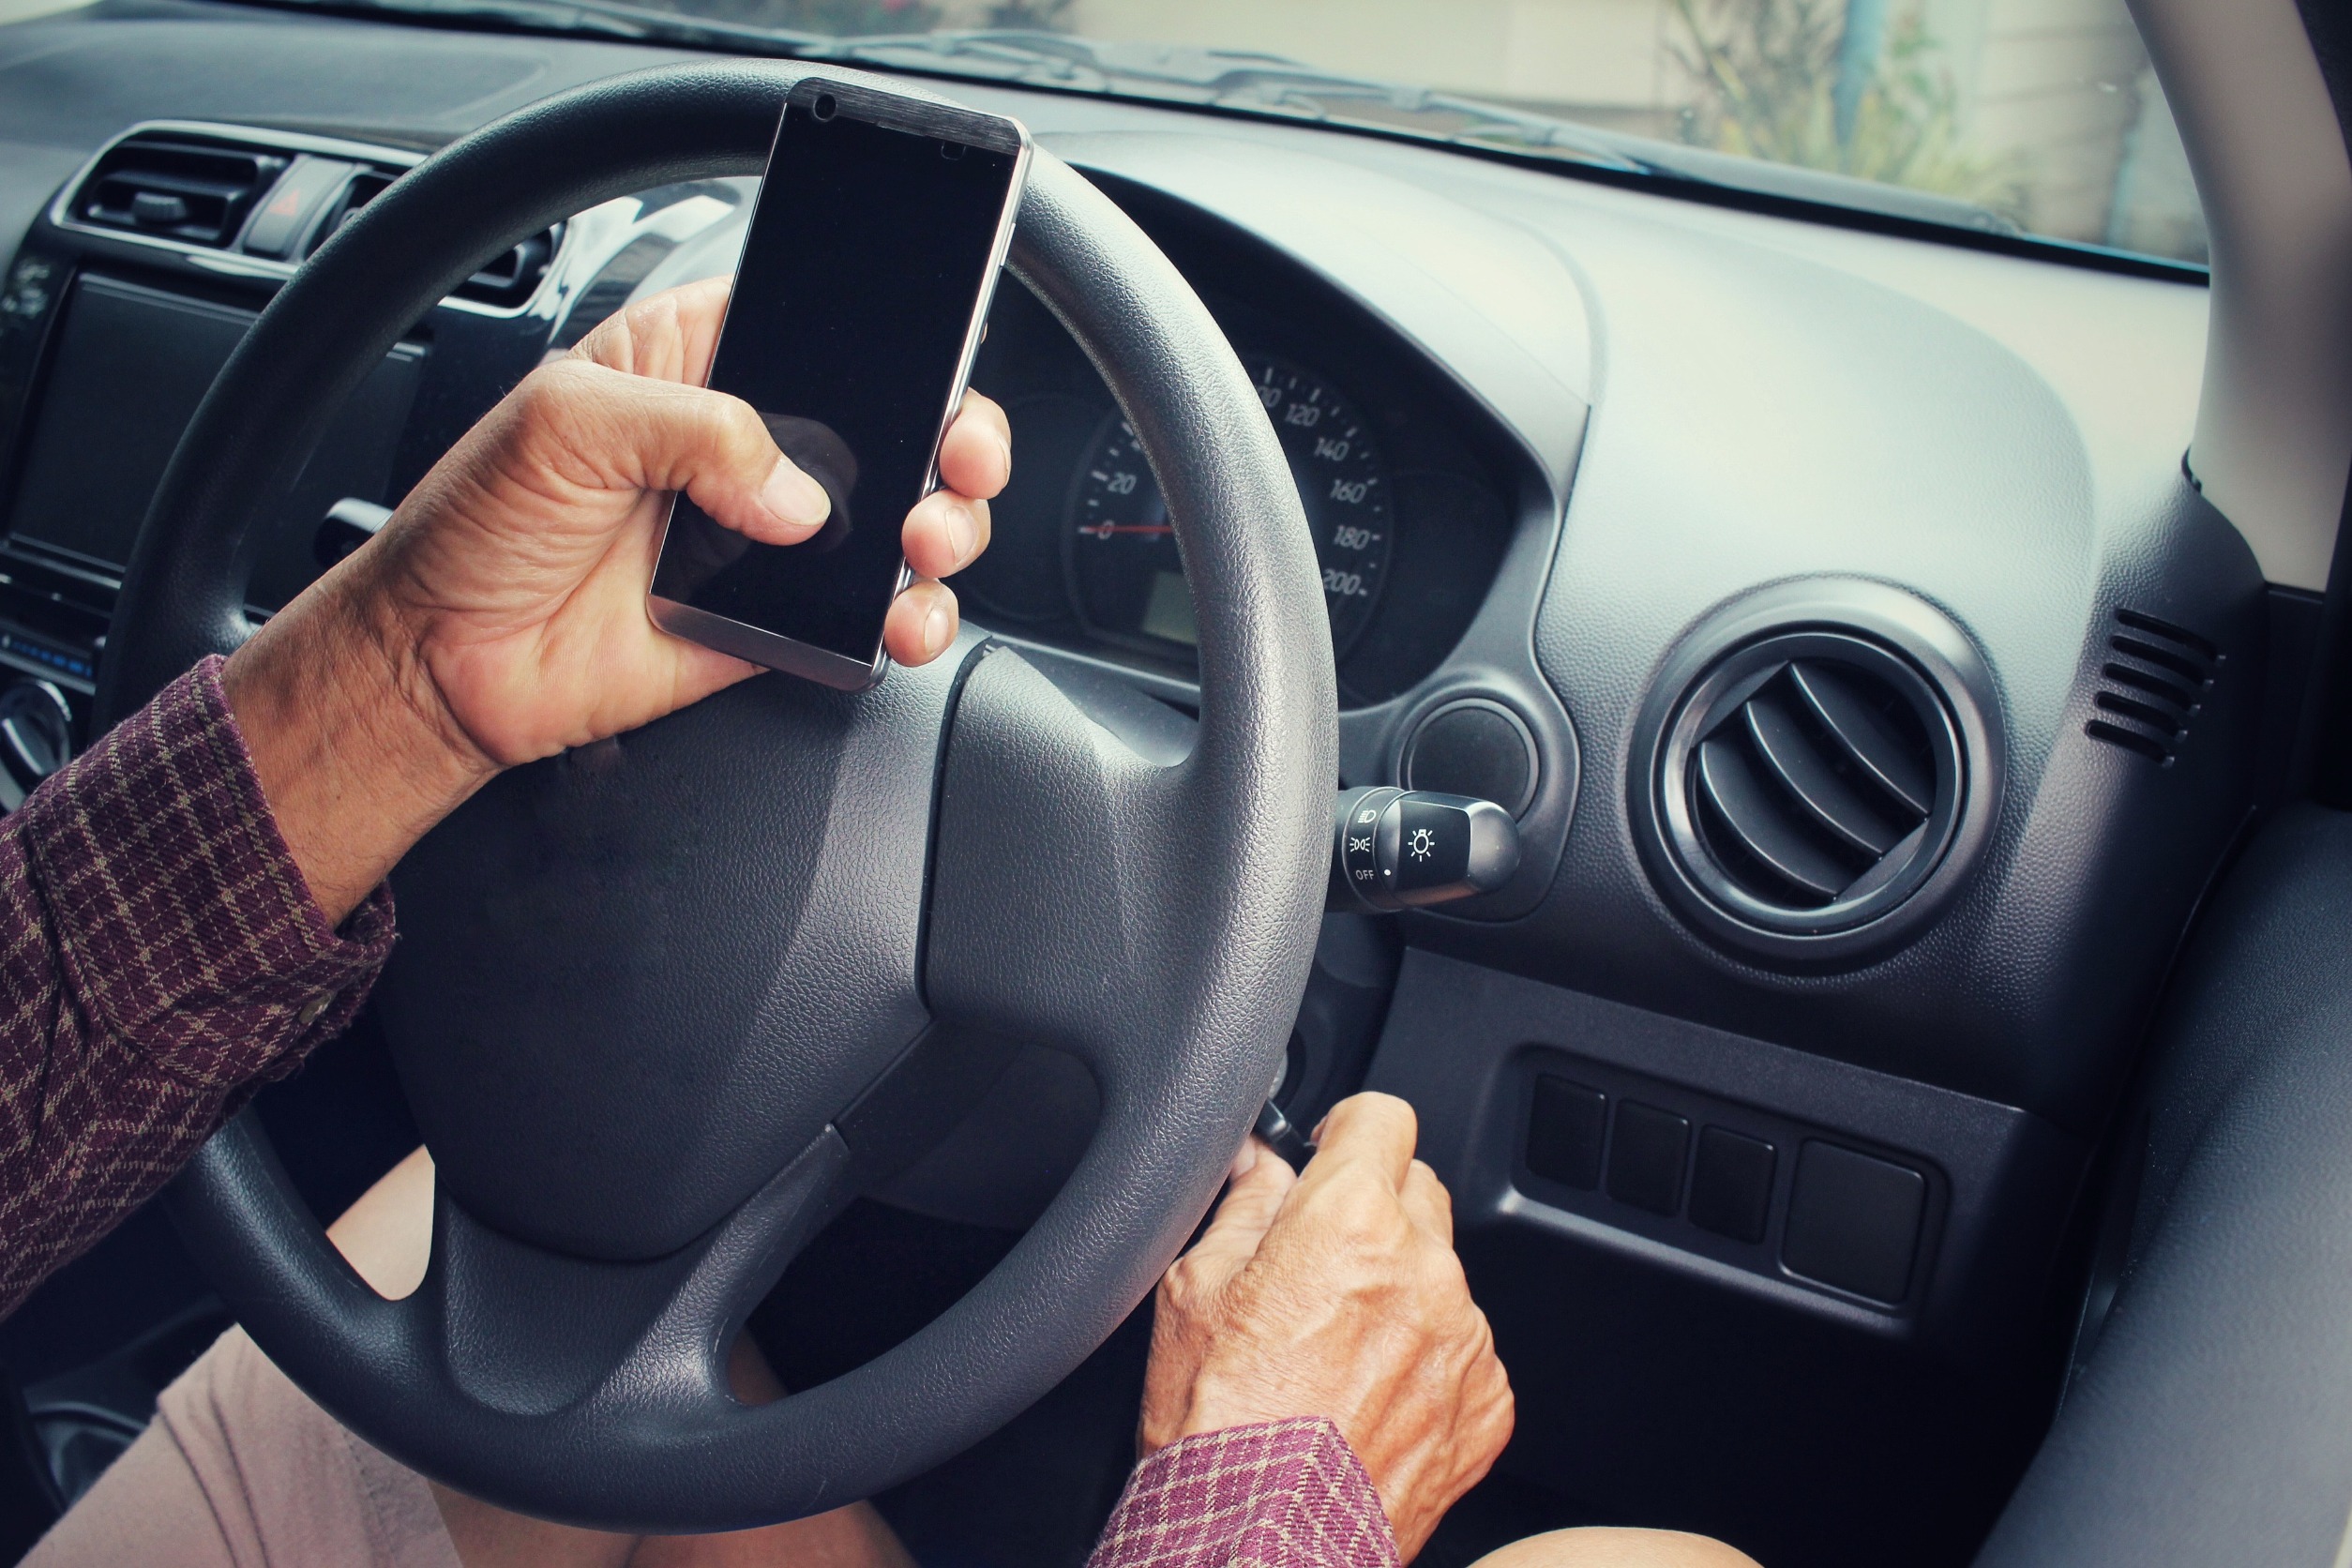 Cell phone use is still affecting traffic accidents